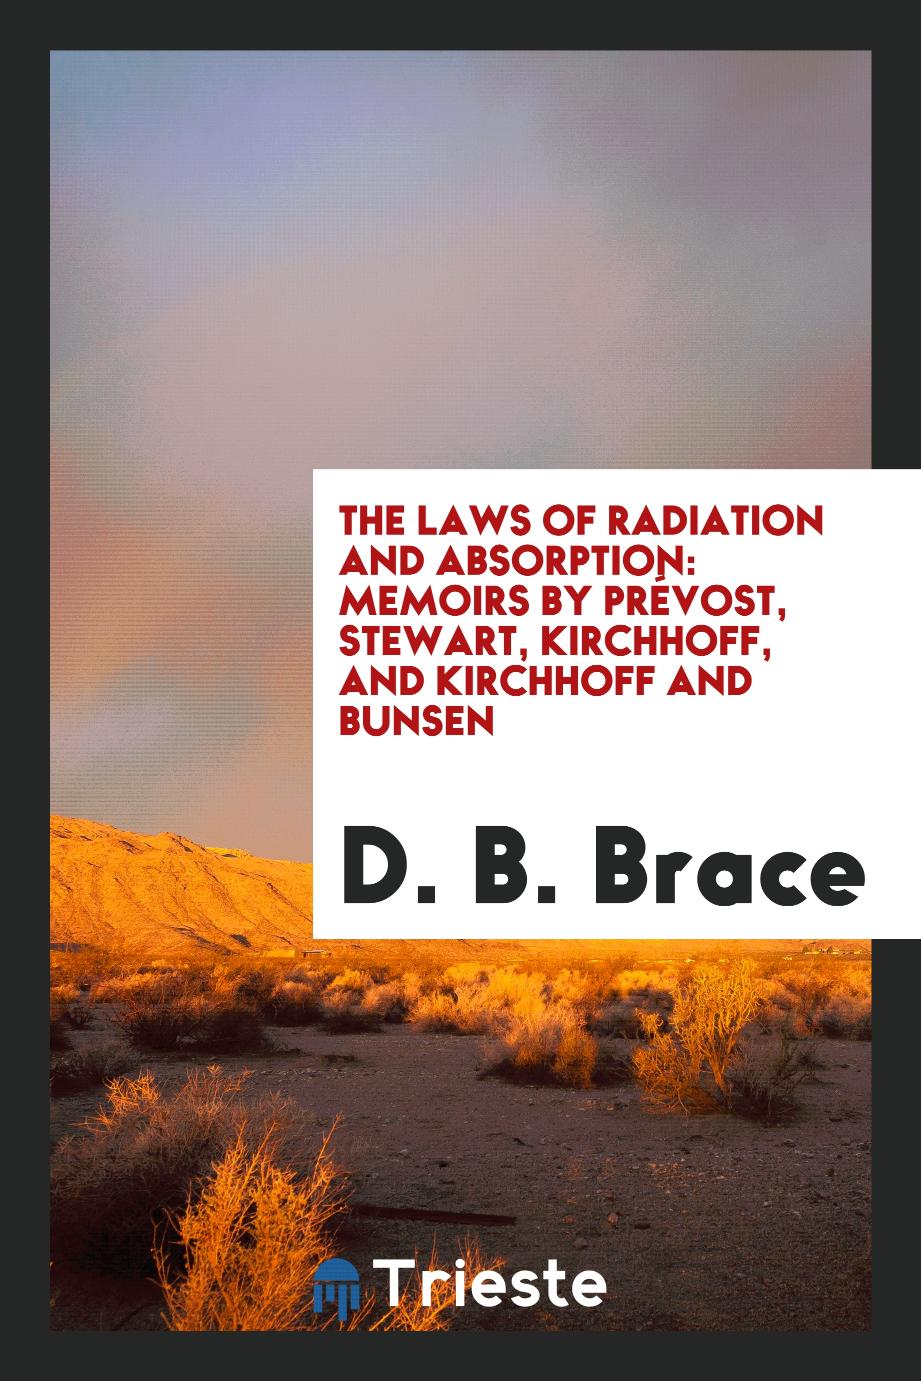 The Laws of Radiation and Absorption: Memoirs by Prévost, Stewart, Kirchhoff, and Kirchhoff and Bunsen